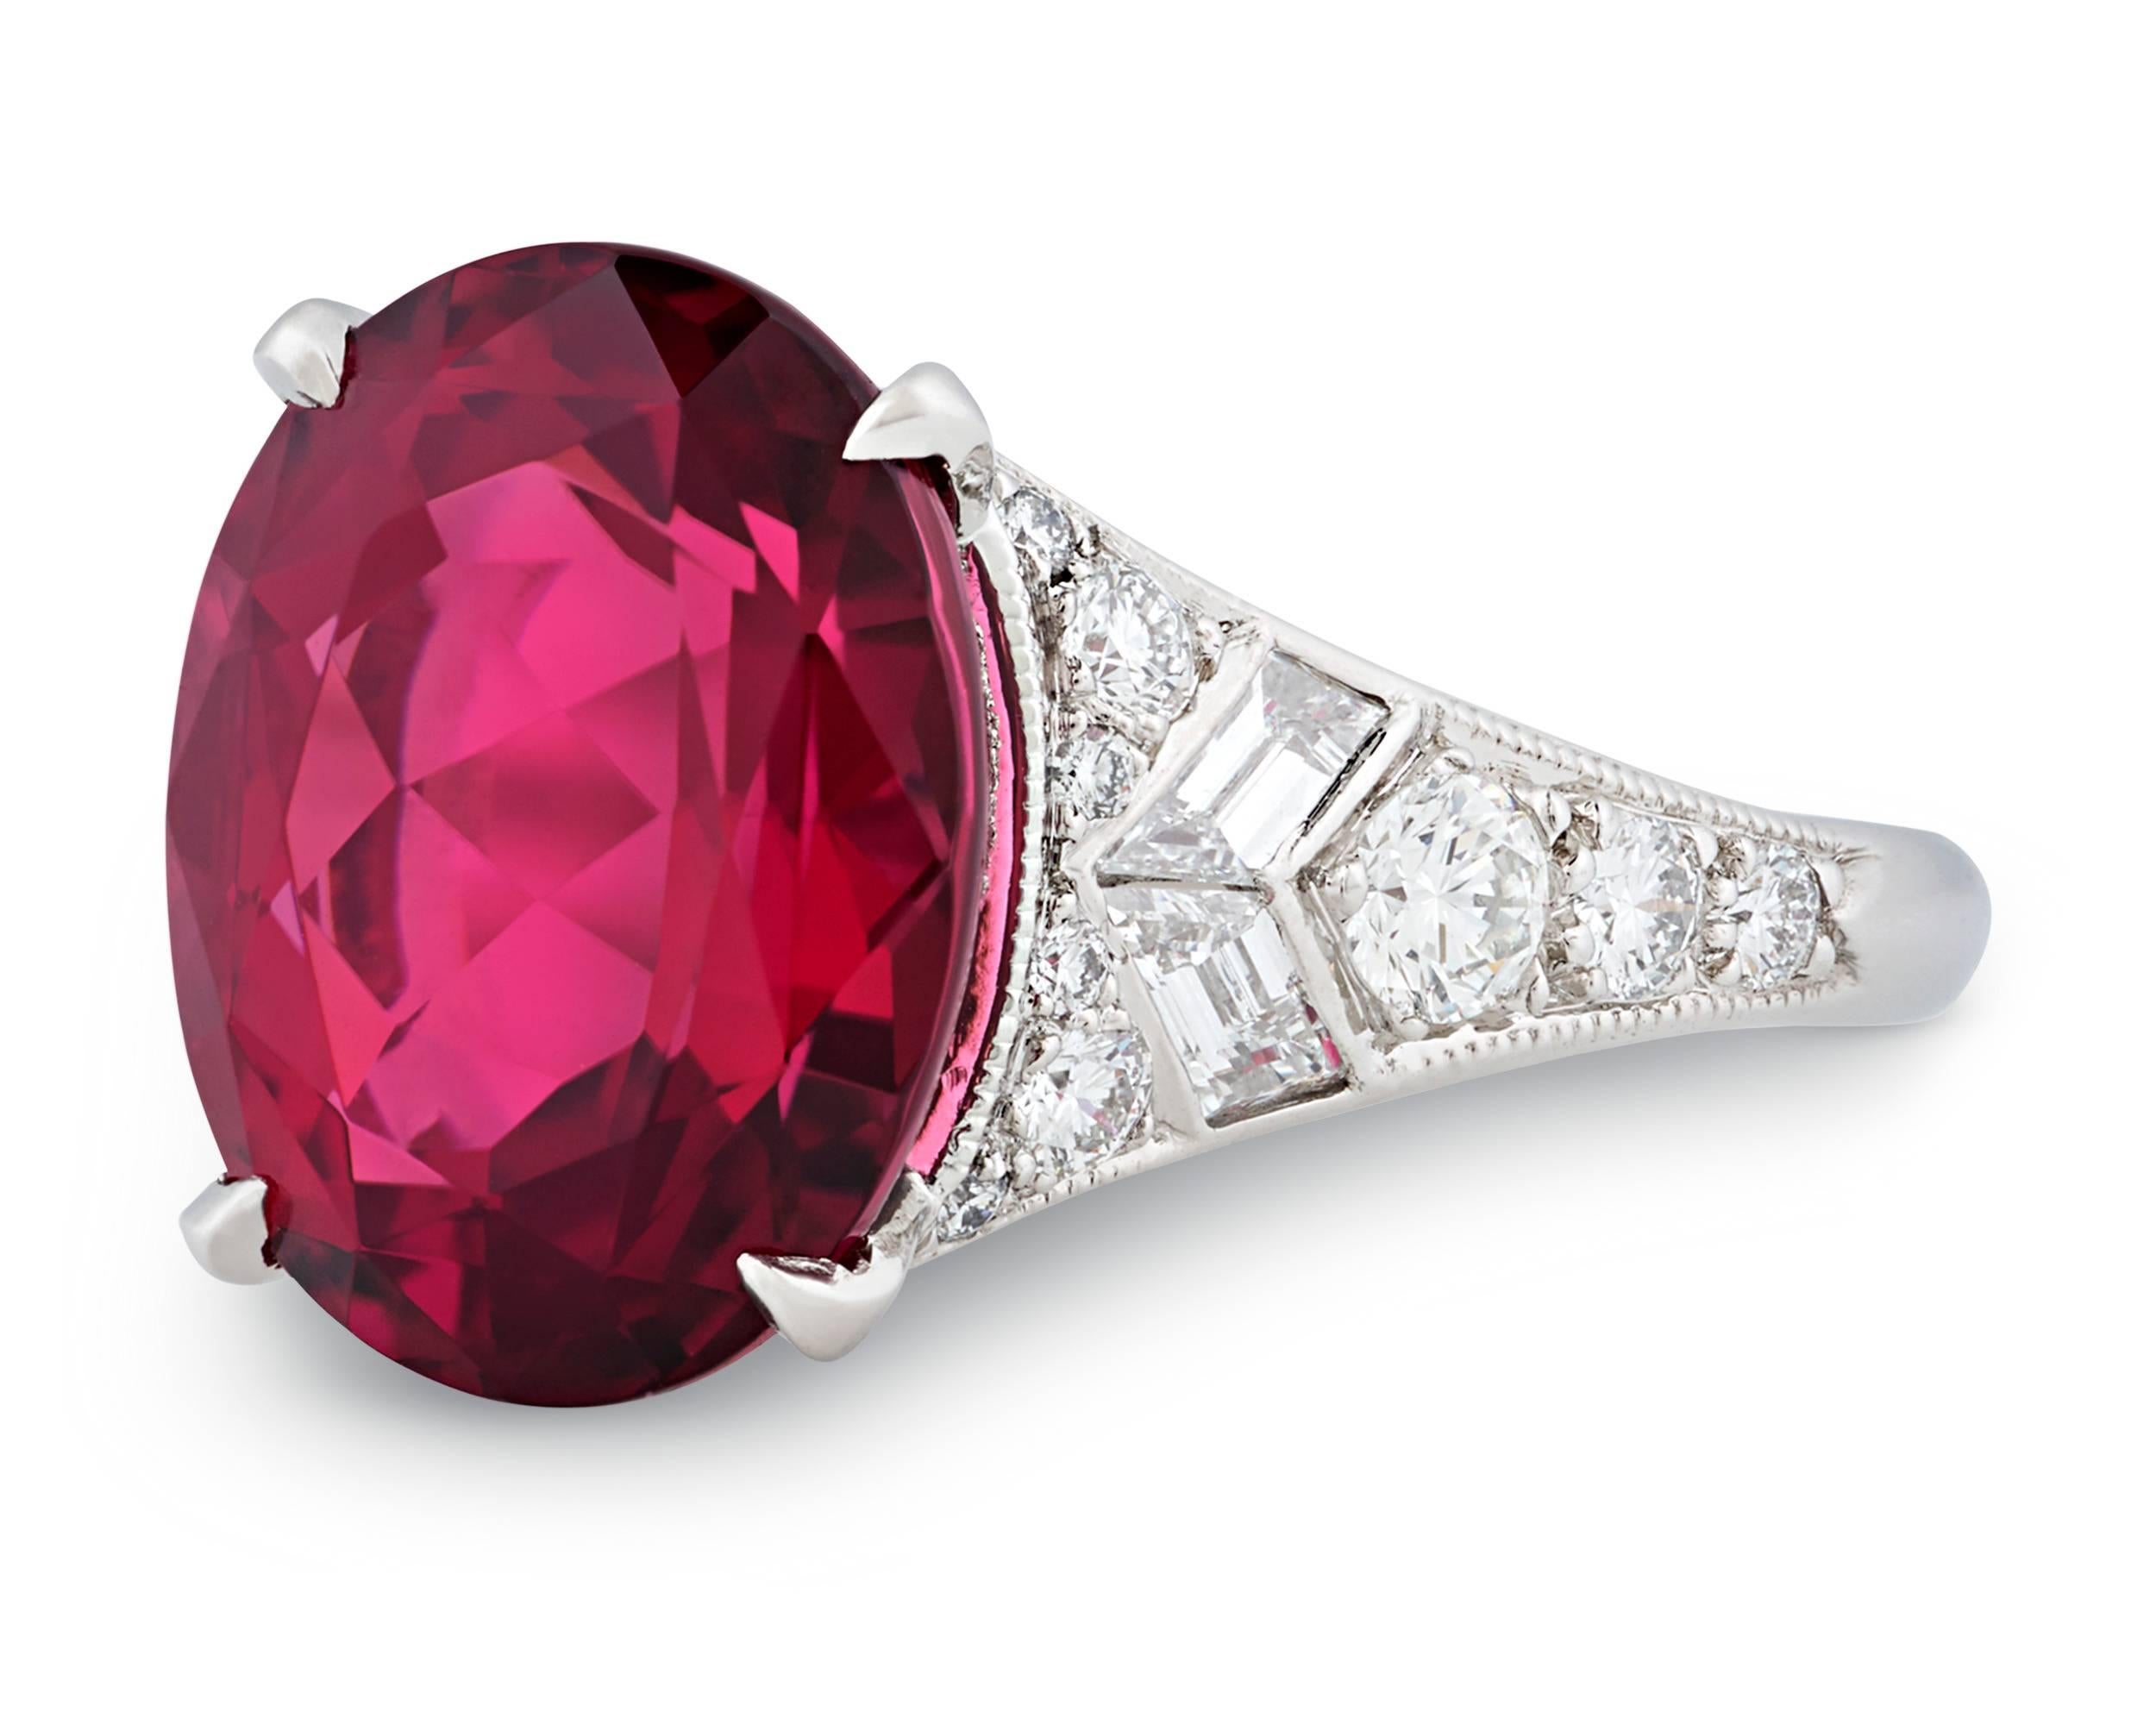 This radiant Tiffany & Co. designer ring is centered by a stunning rubellite tourmaline with a bright, richly saturated crimson hue. Weighing 6.07 carats, the gorgeous gemstone is flanked by sparkling round brilliant and baguette diamonds